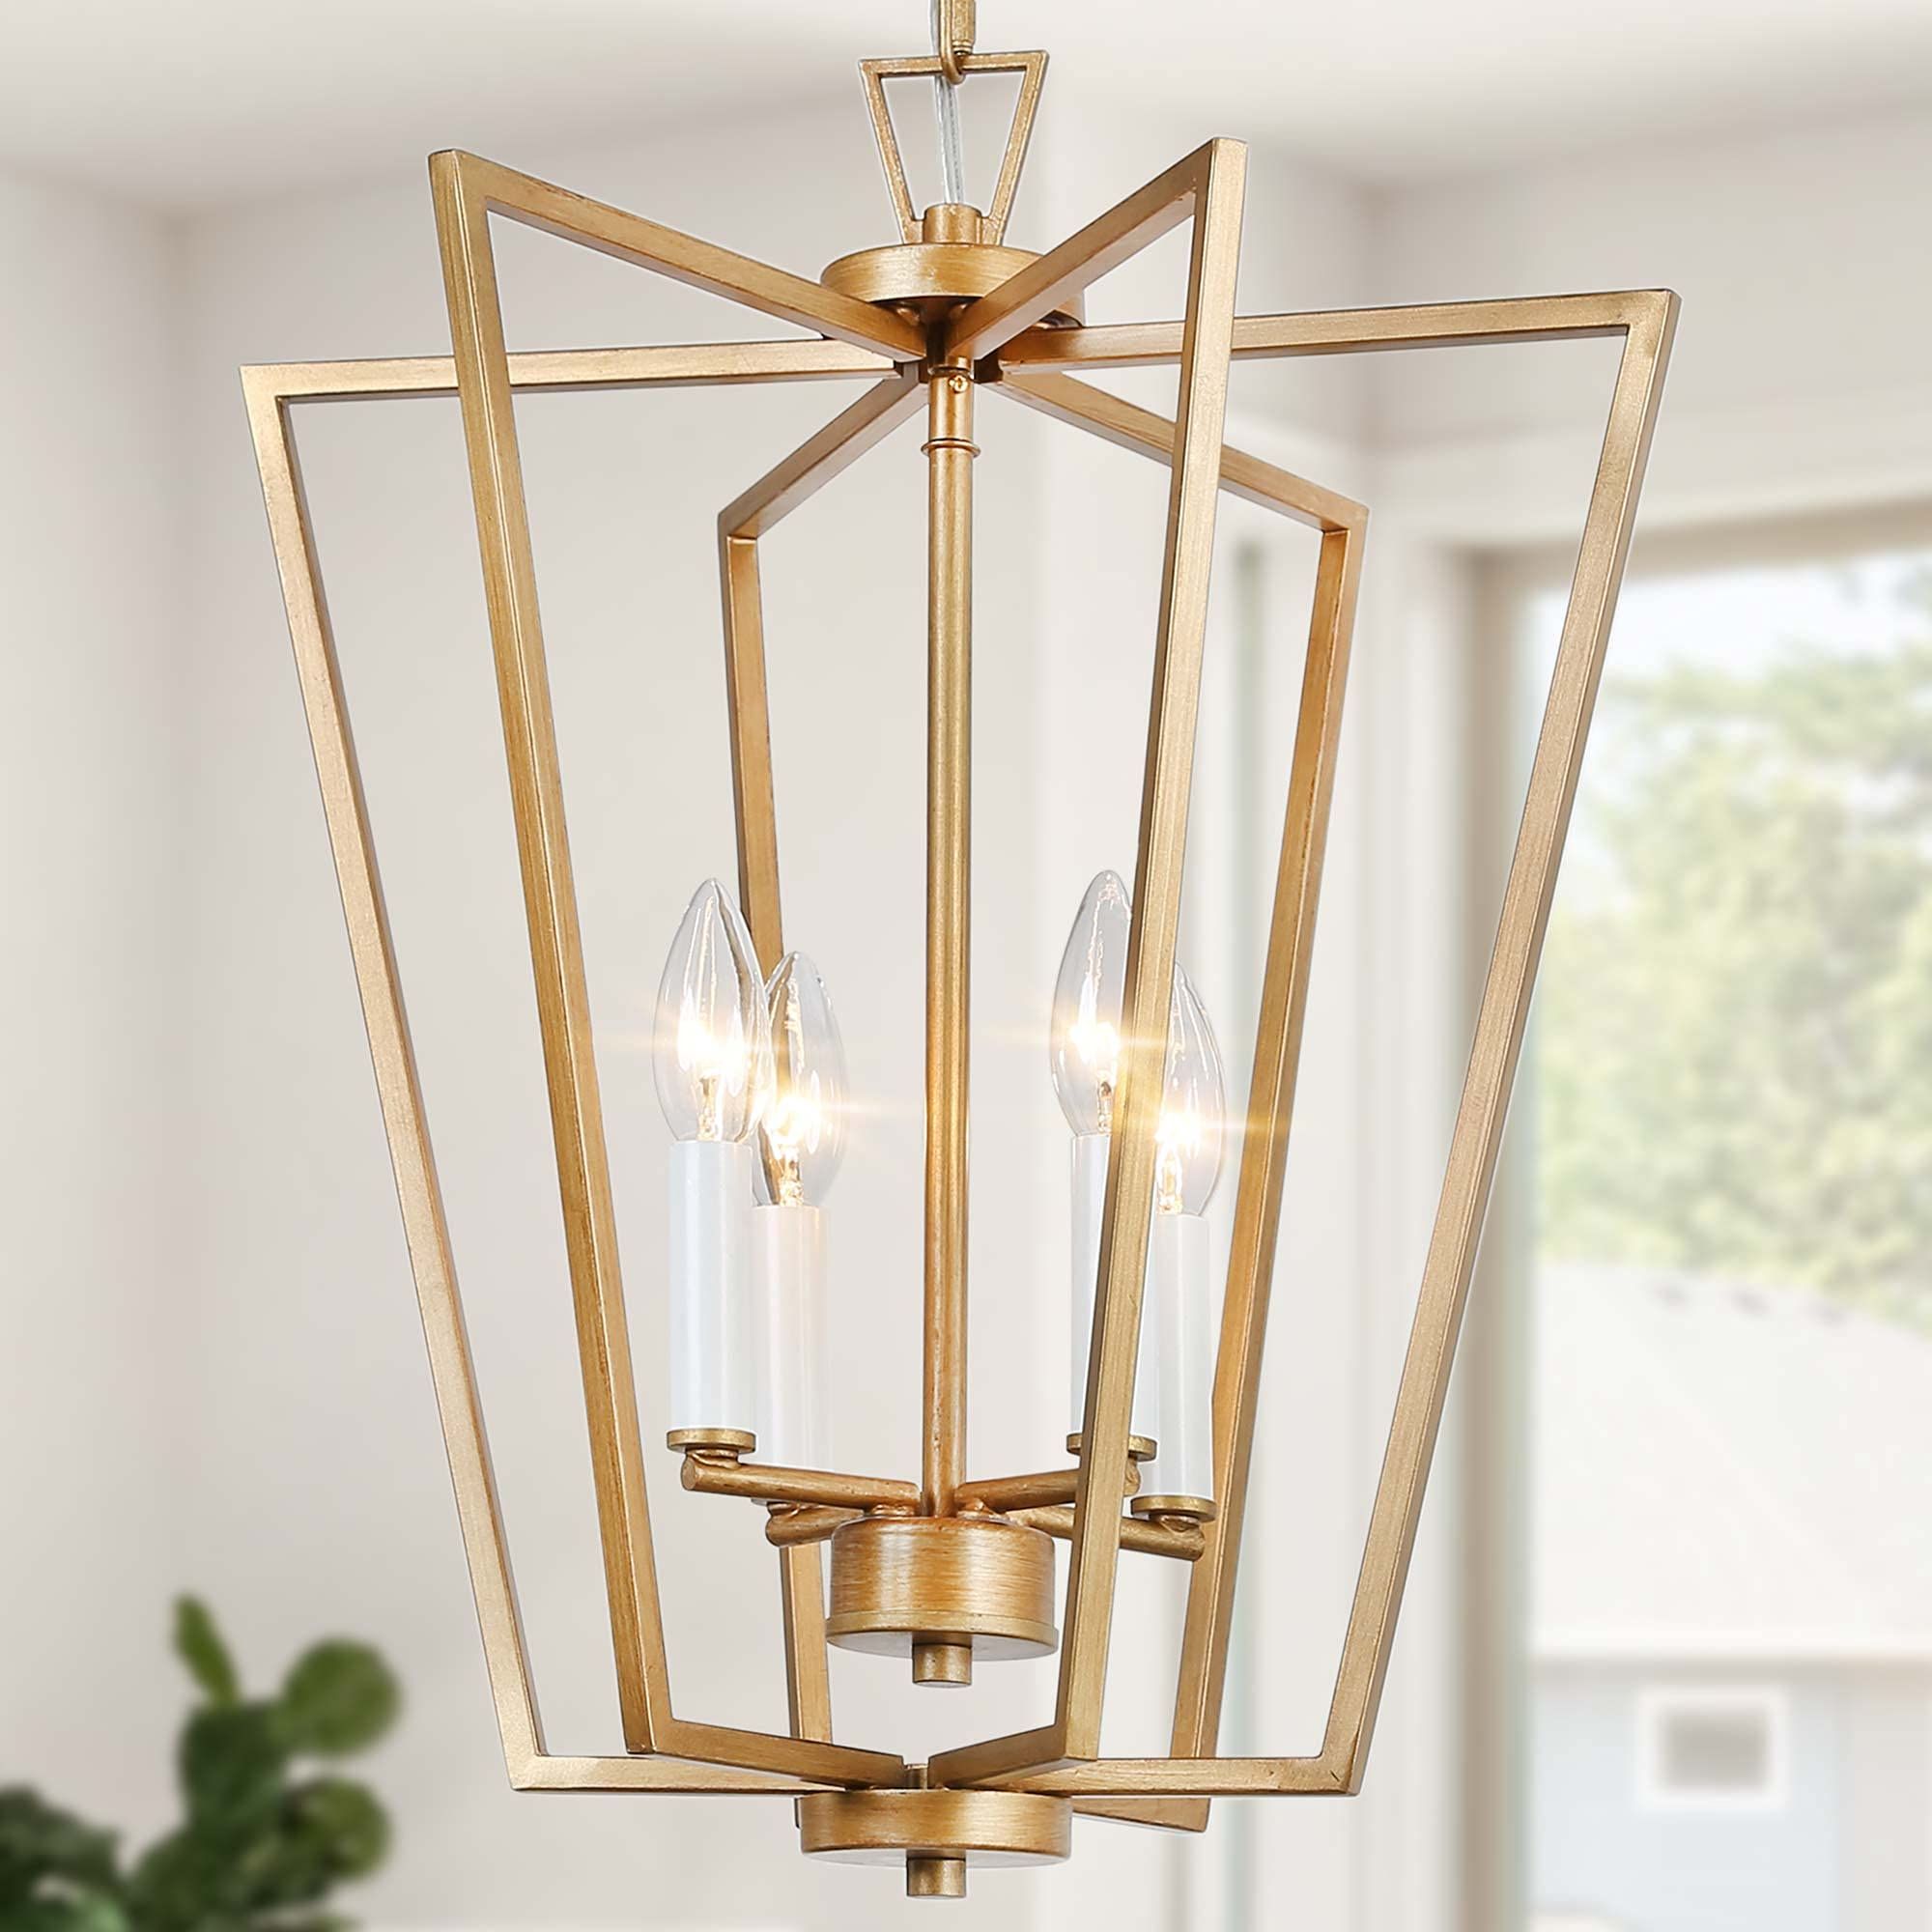 Well Known Gild Three Light Lantern Chandeliers Throughout Gold Chandelier, 4 Light Modern Lantern Gold Pendant Light With Rotatable  Framework For Kitchen Island, Dining Room, Foyer And Entryway, Antique  Brushed Gold,  (View 9 of 15)